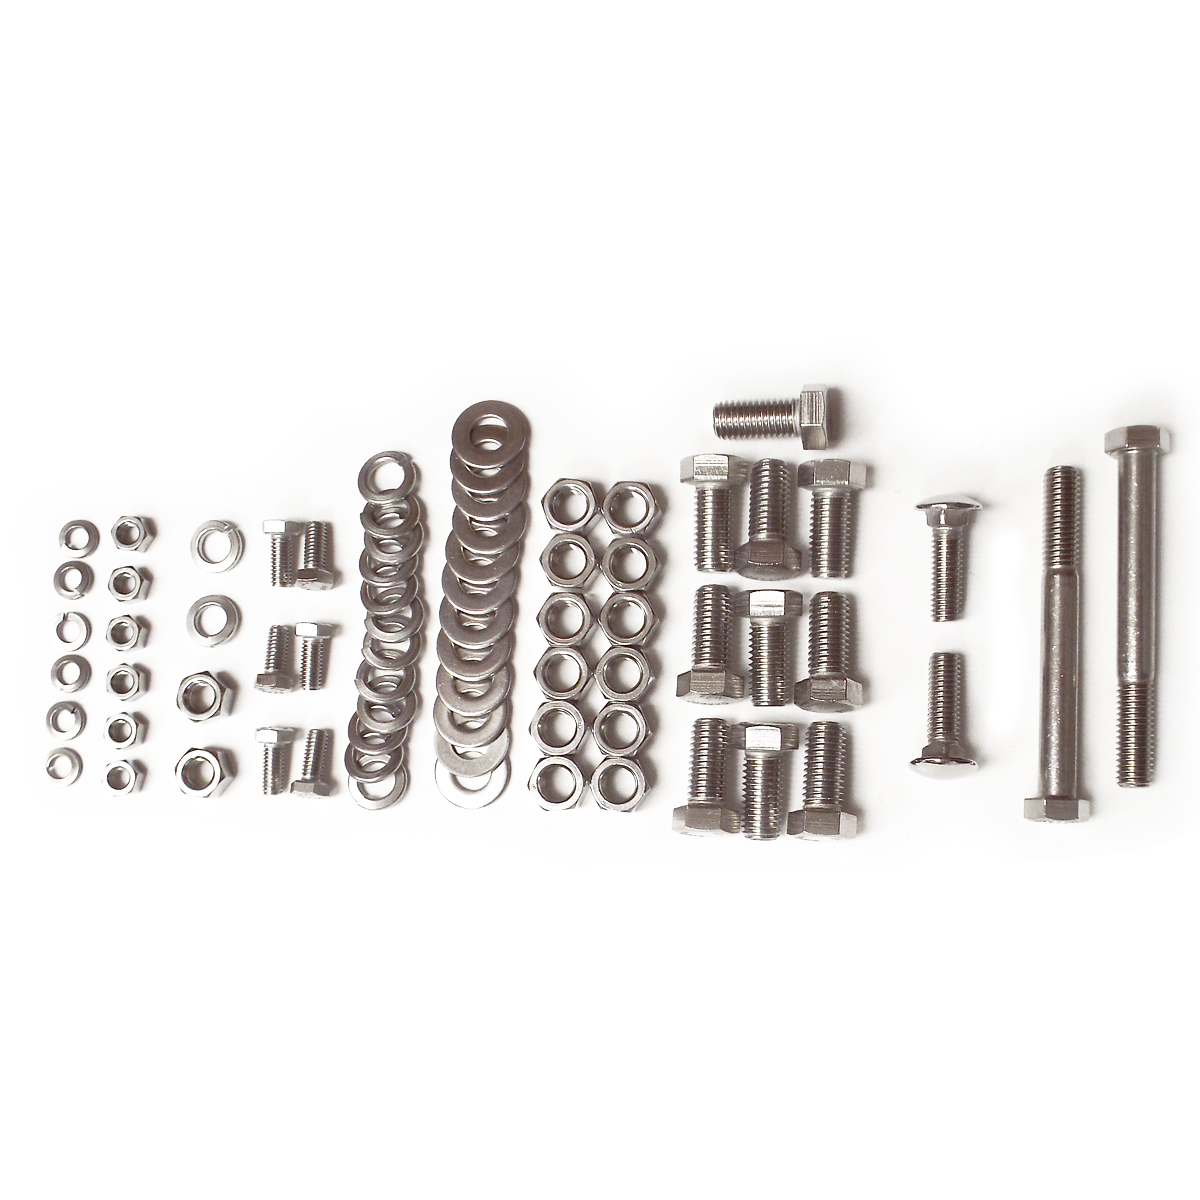 1955-1958 Cameo Rear Bumper Bolt Kit Hex & Carriage Head Stainless Chevrolet and GMC Pickup Truck